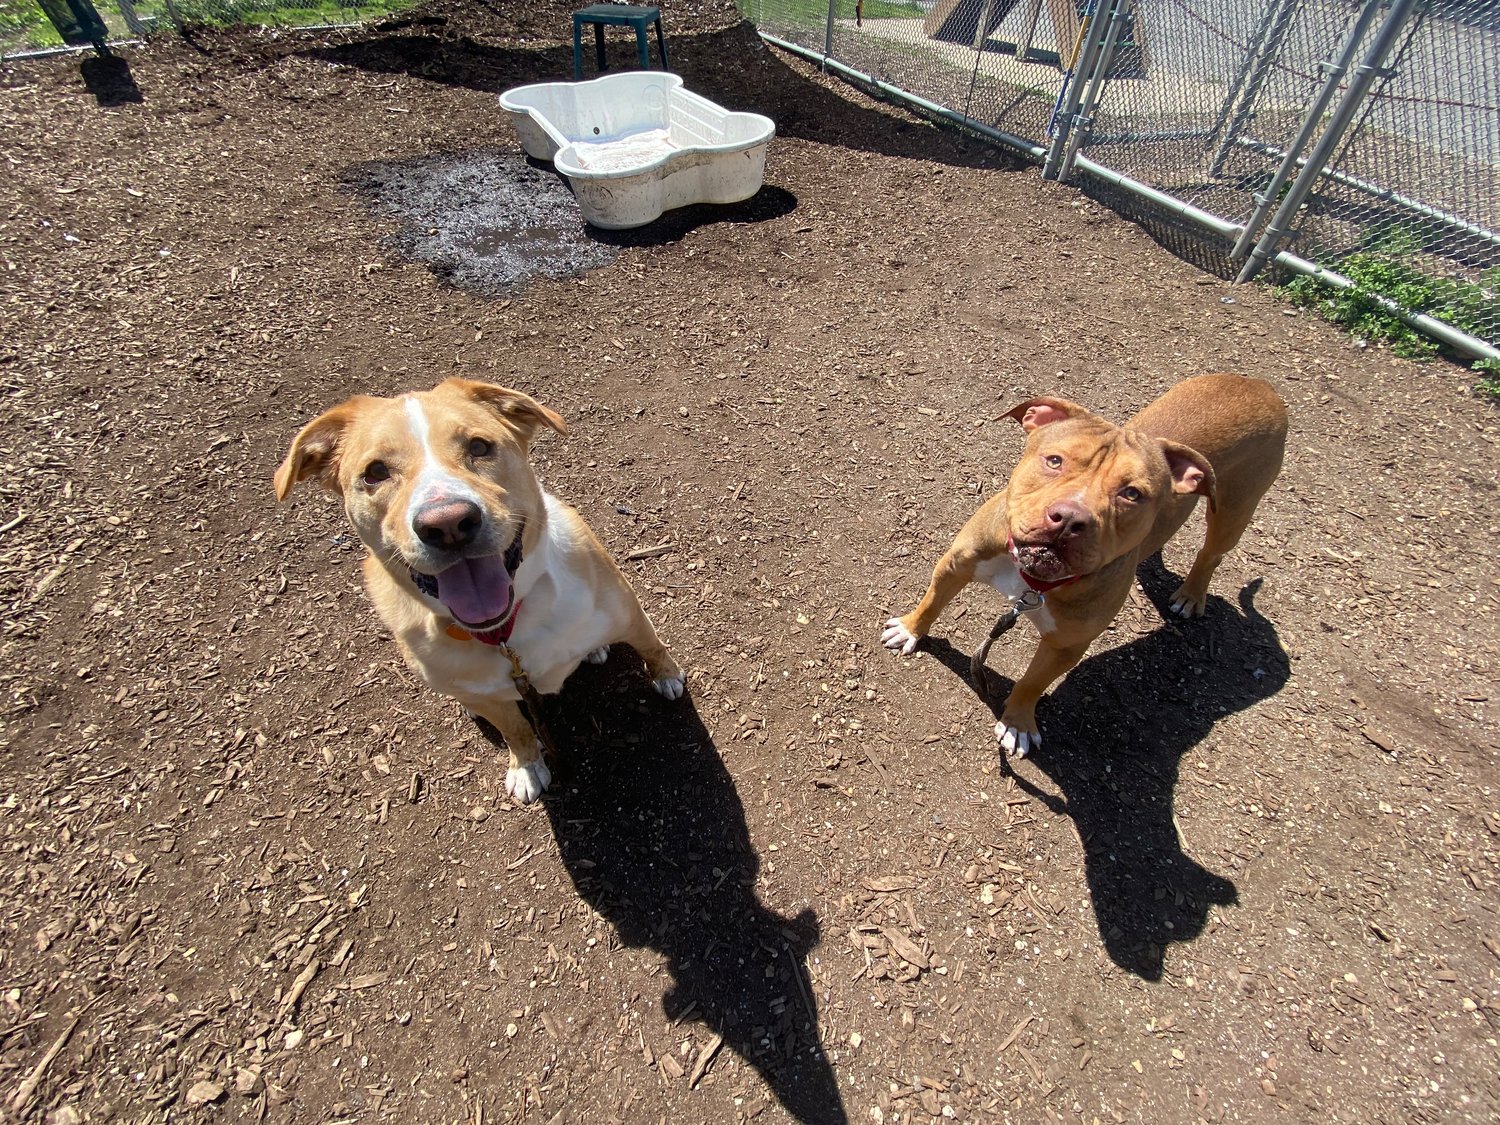 Dexter and Dunkin, two dogs currently available for adoption at the Town of Hempstead Animal Shelter. Located on Beltagh Avenue in Wantagh, the town’s lone shelter offers adoptions for pets like Dexter and Dunkin for $25.